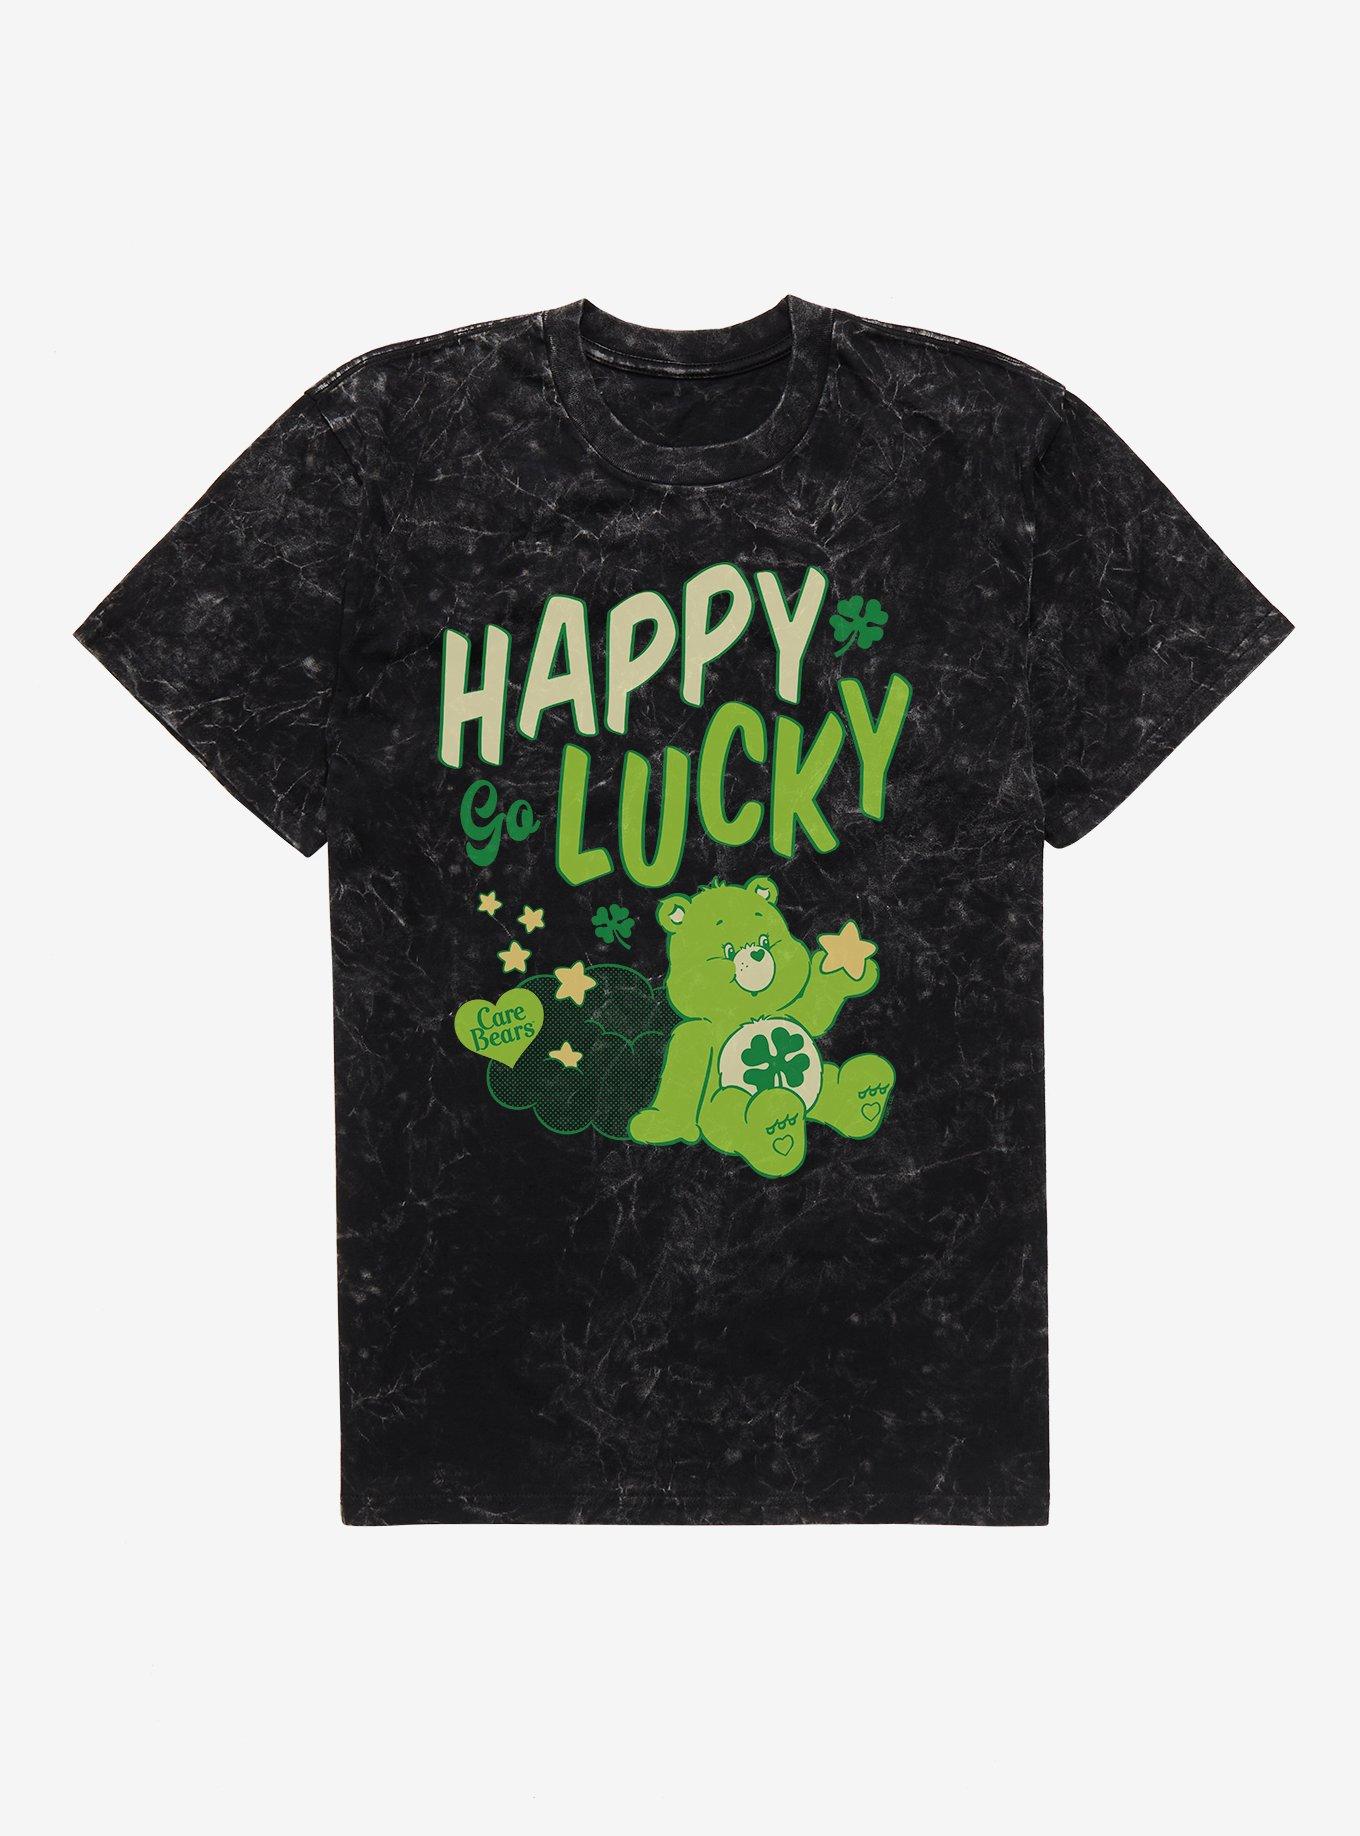 Hot Topic Care Bears Happy Go Lucky Mineral Wash T-Shirt